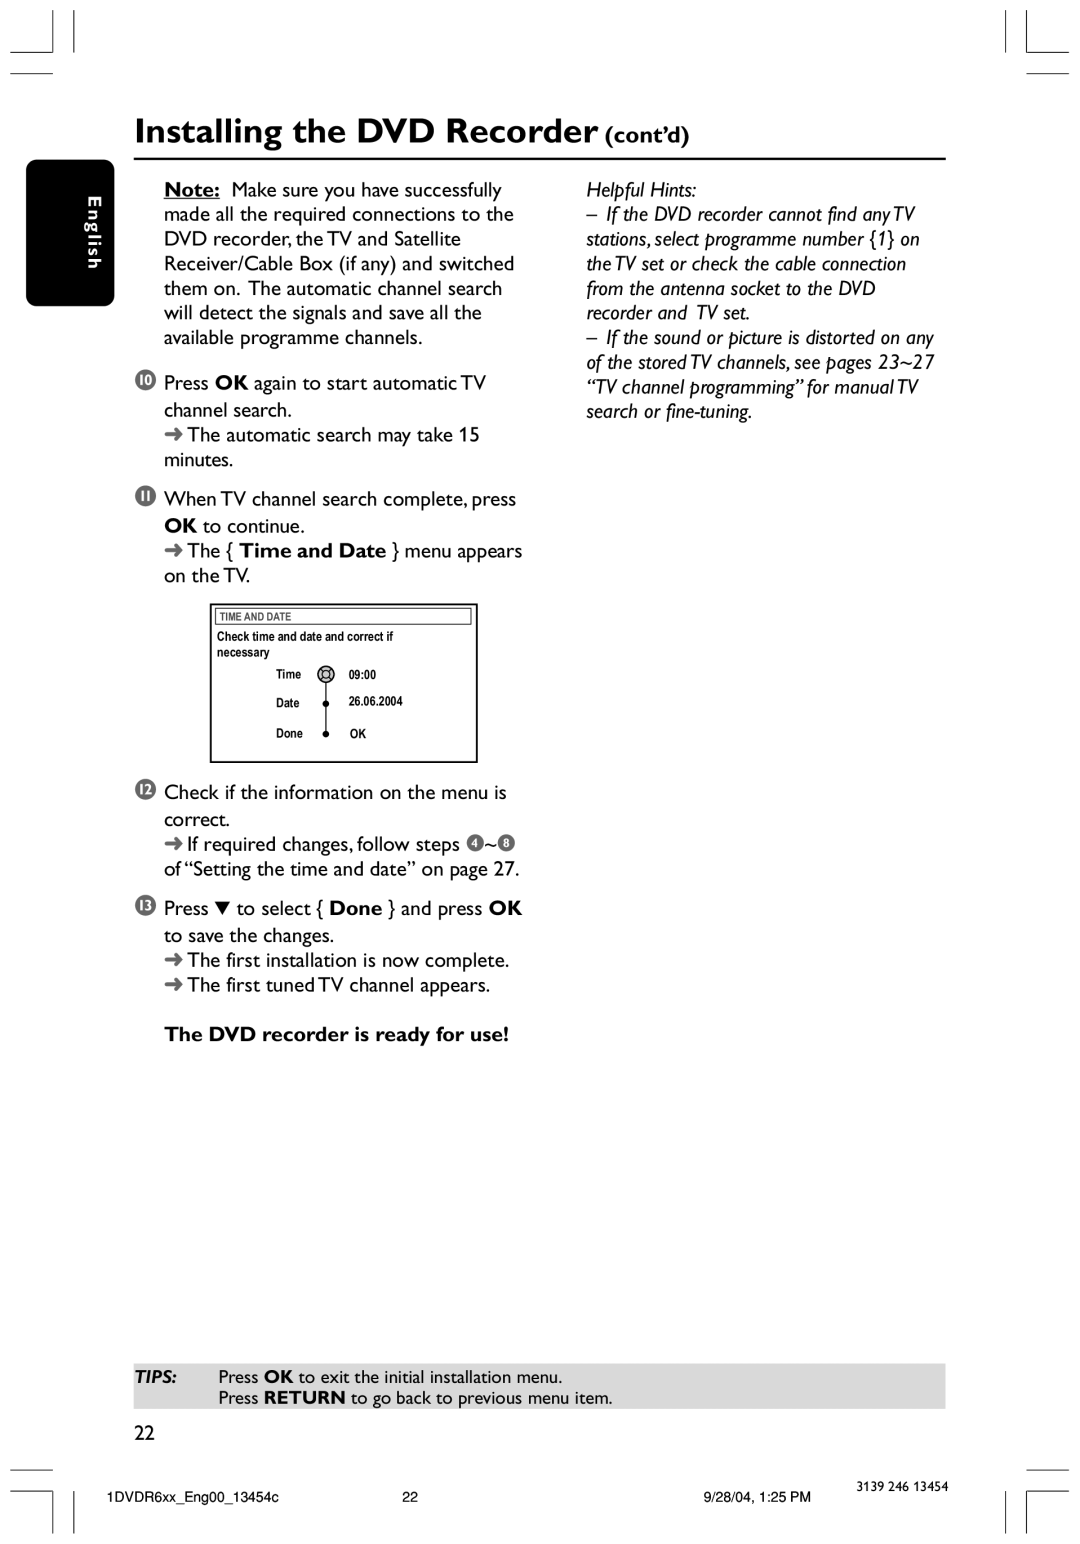 Philips DVDR612/97 user manual Installing the DVD Recorder cont’d, Helpful Hints, from the antenna socket to the DVD 